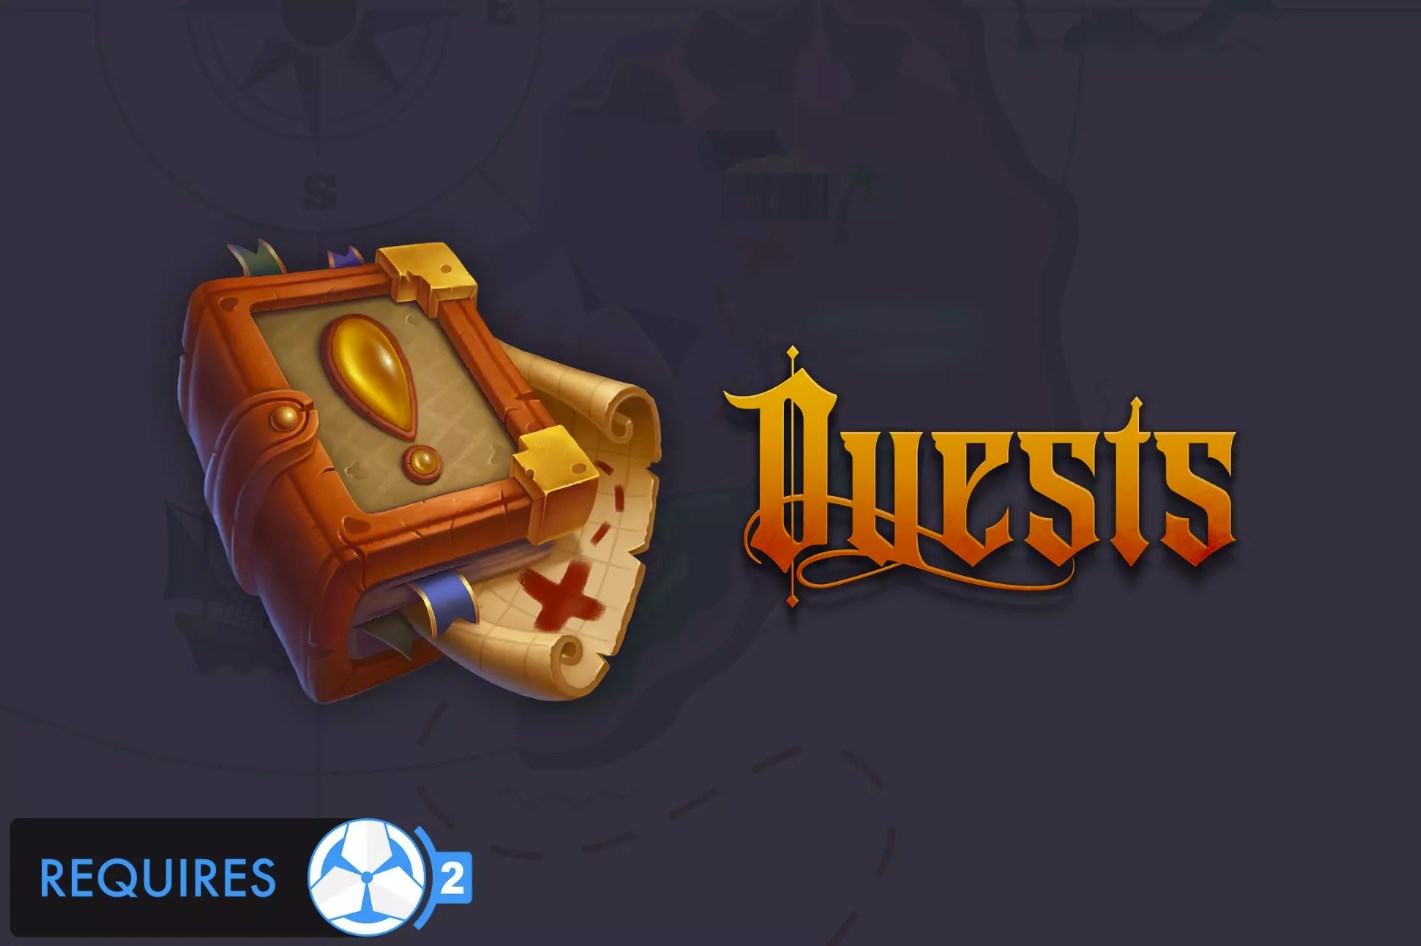 Game creator 2 Quest 2 v2.1.3